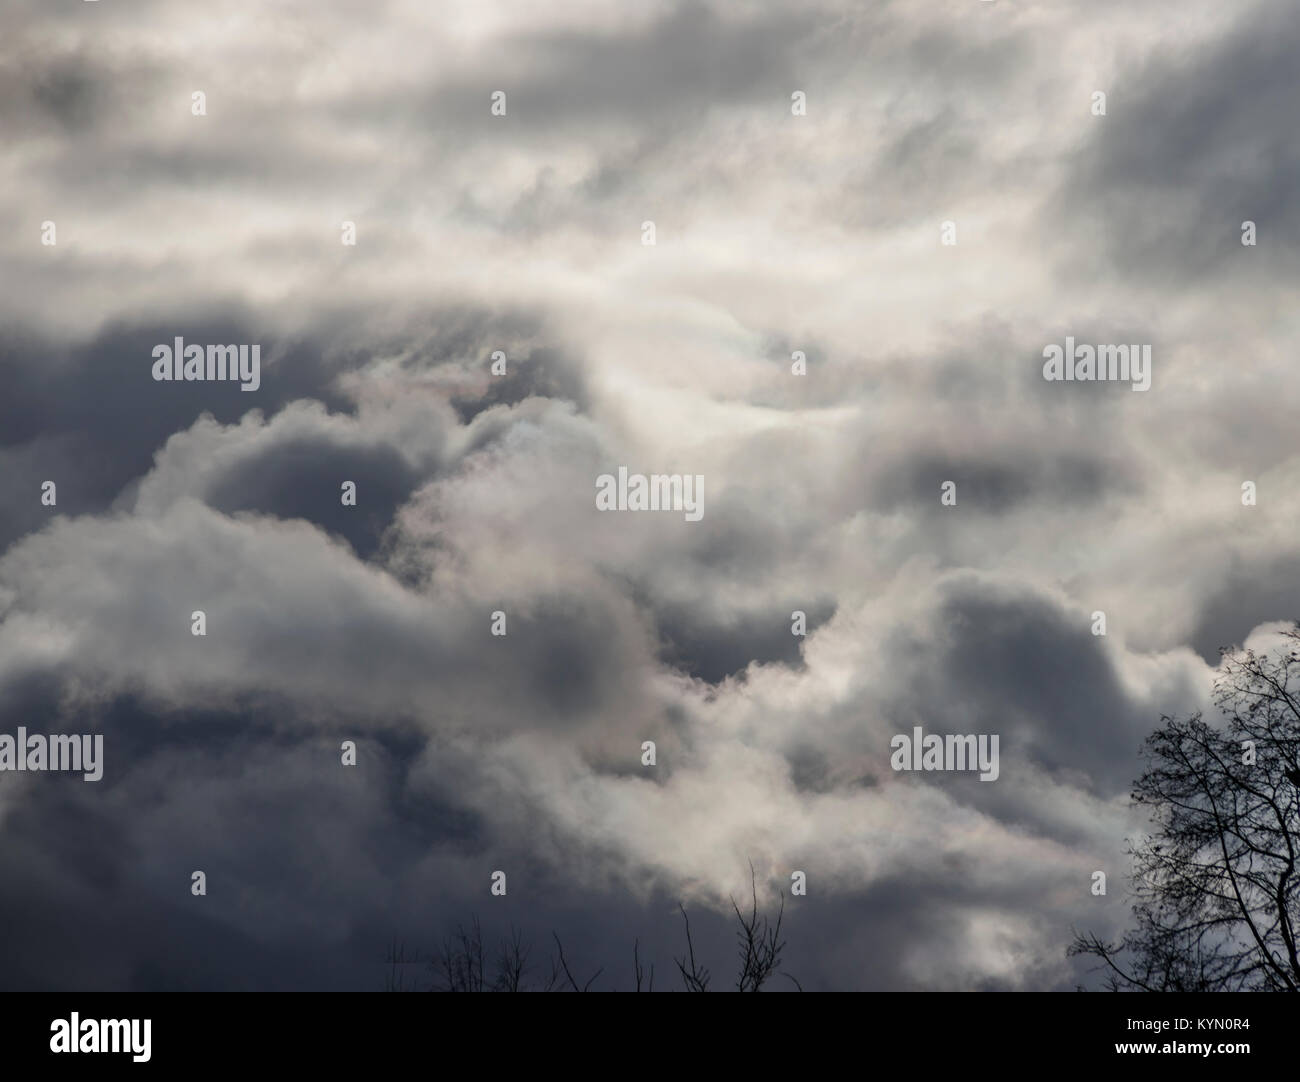 Dramatic sky view in heavy clouds Stock Photo